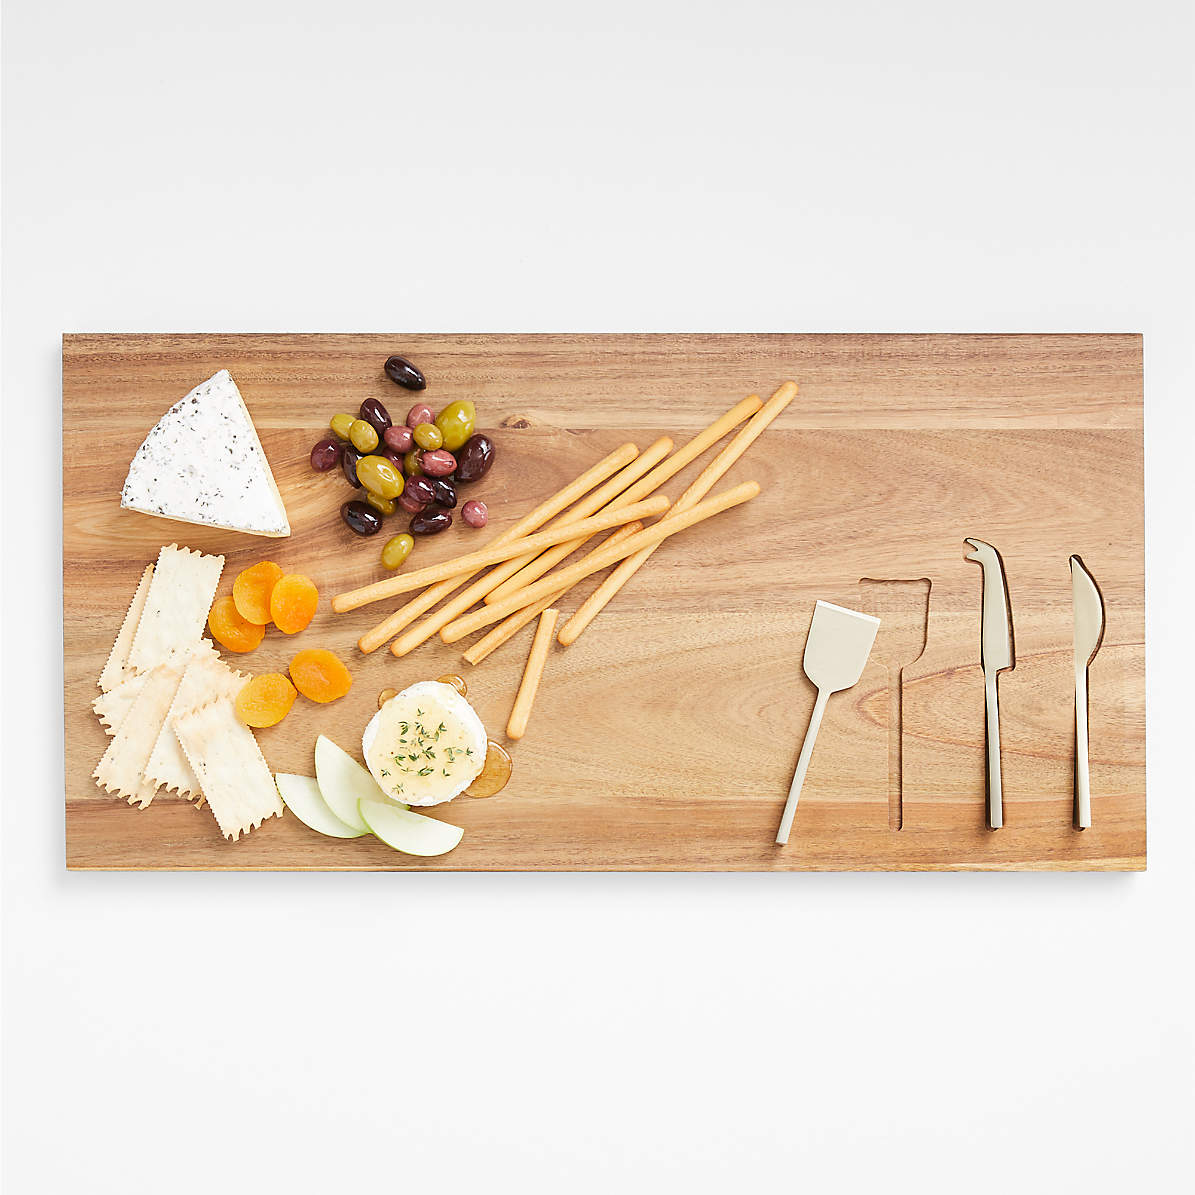 Kitchen items - plates knives storage containers cheese boards and